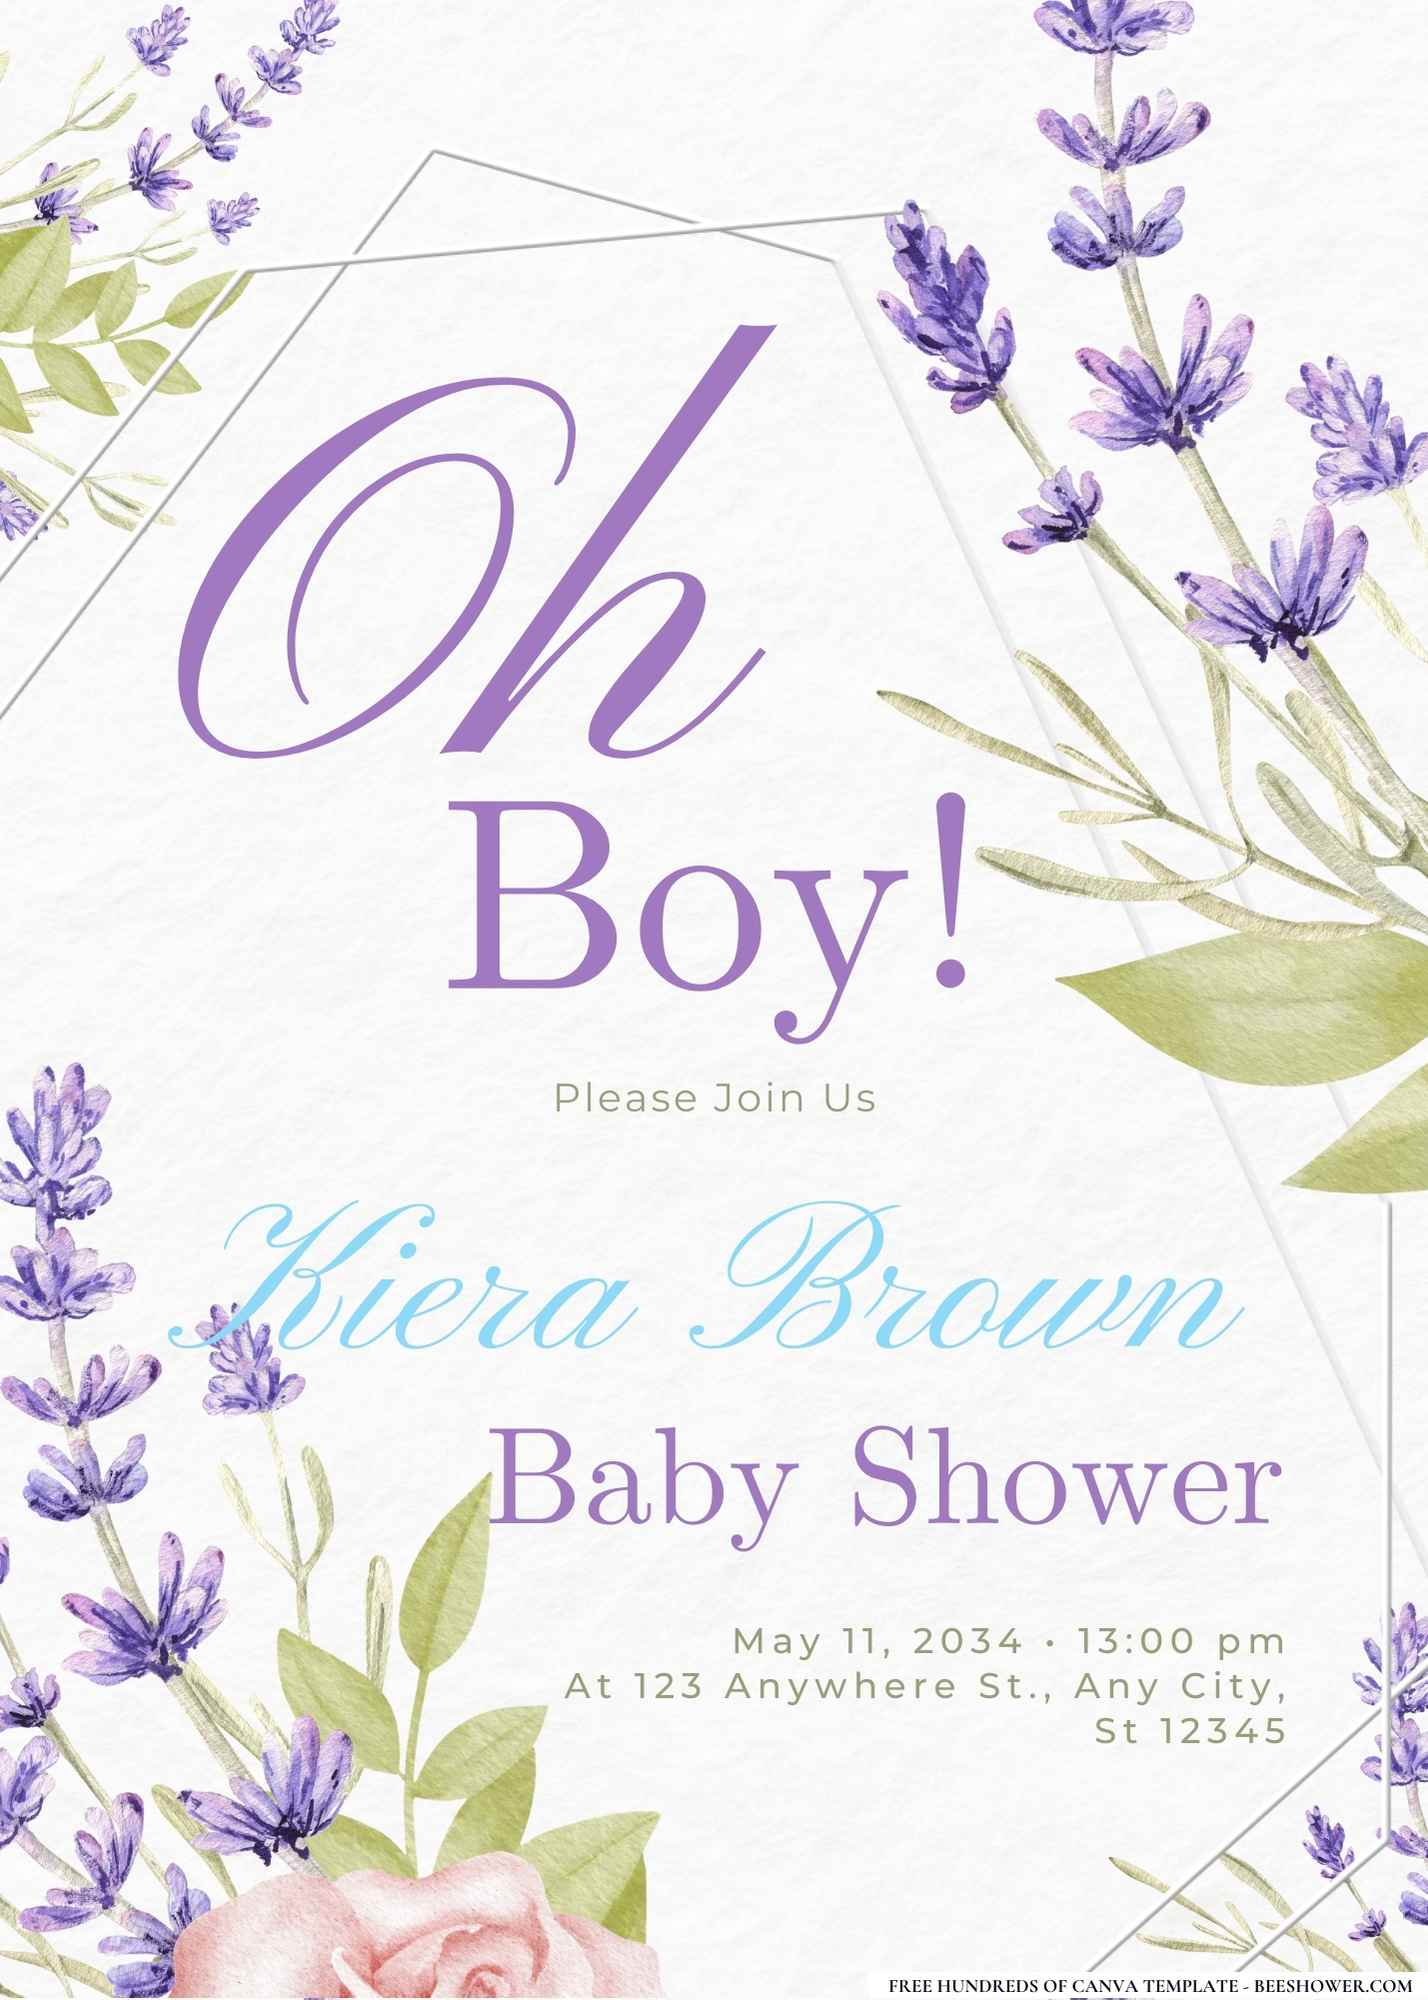 Lavender Love and Lullabies Baby Shower Invitation